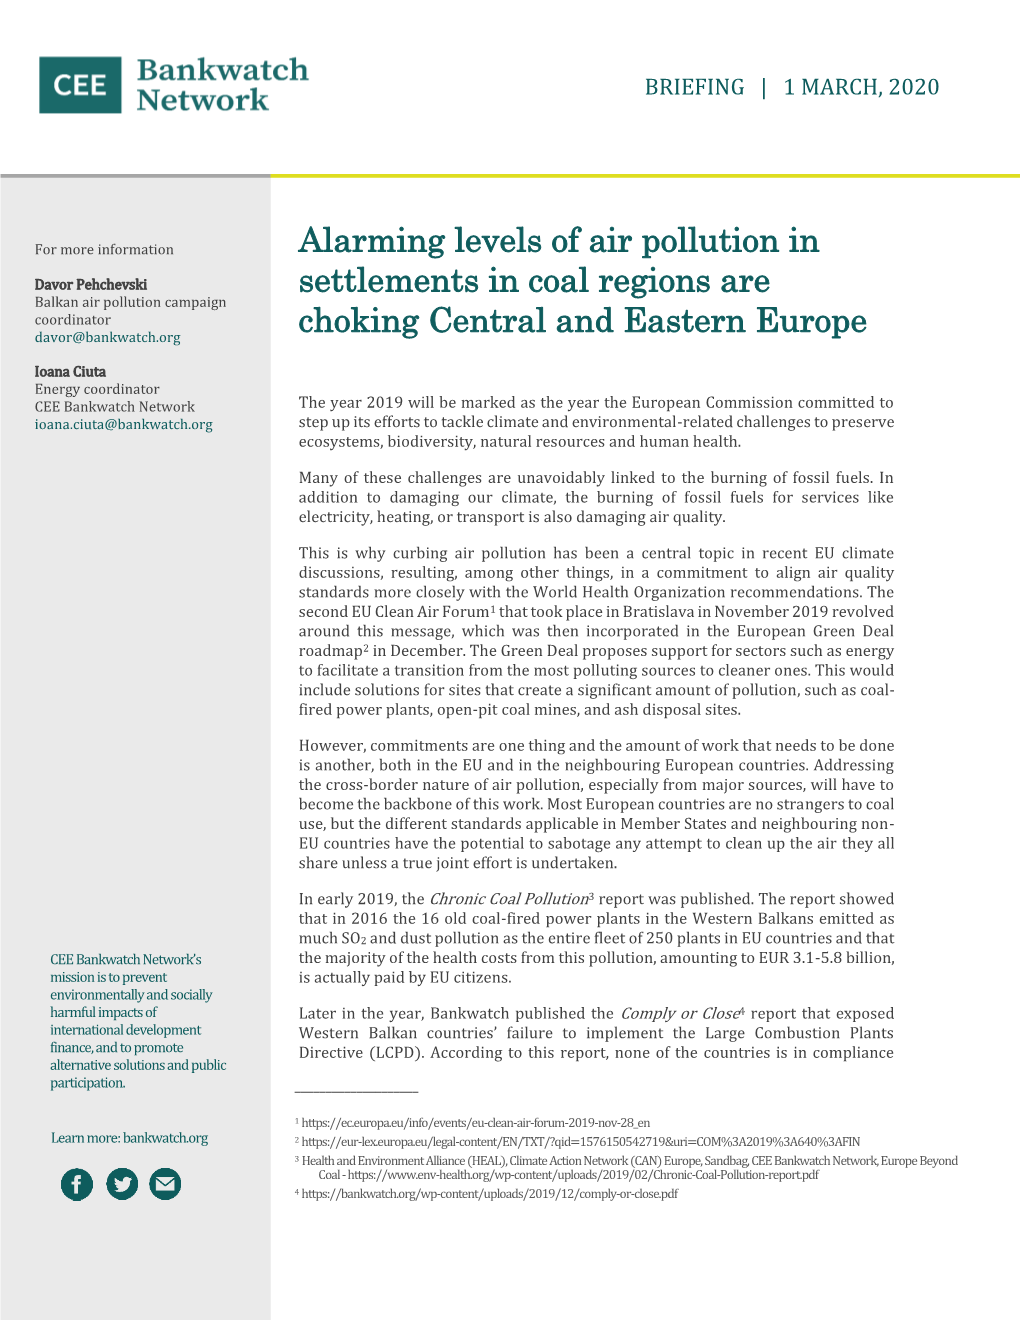 Alarming Levels of Air Pollution in Settlements in Coal Regions Are Choking Central and Eastern Europe